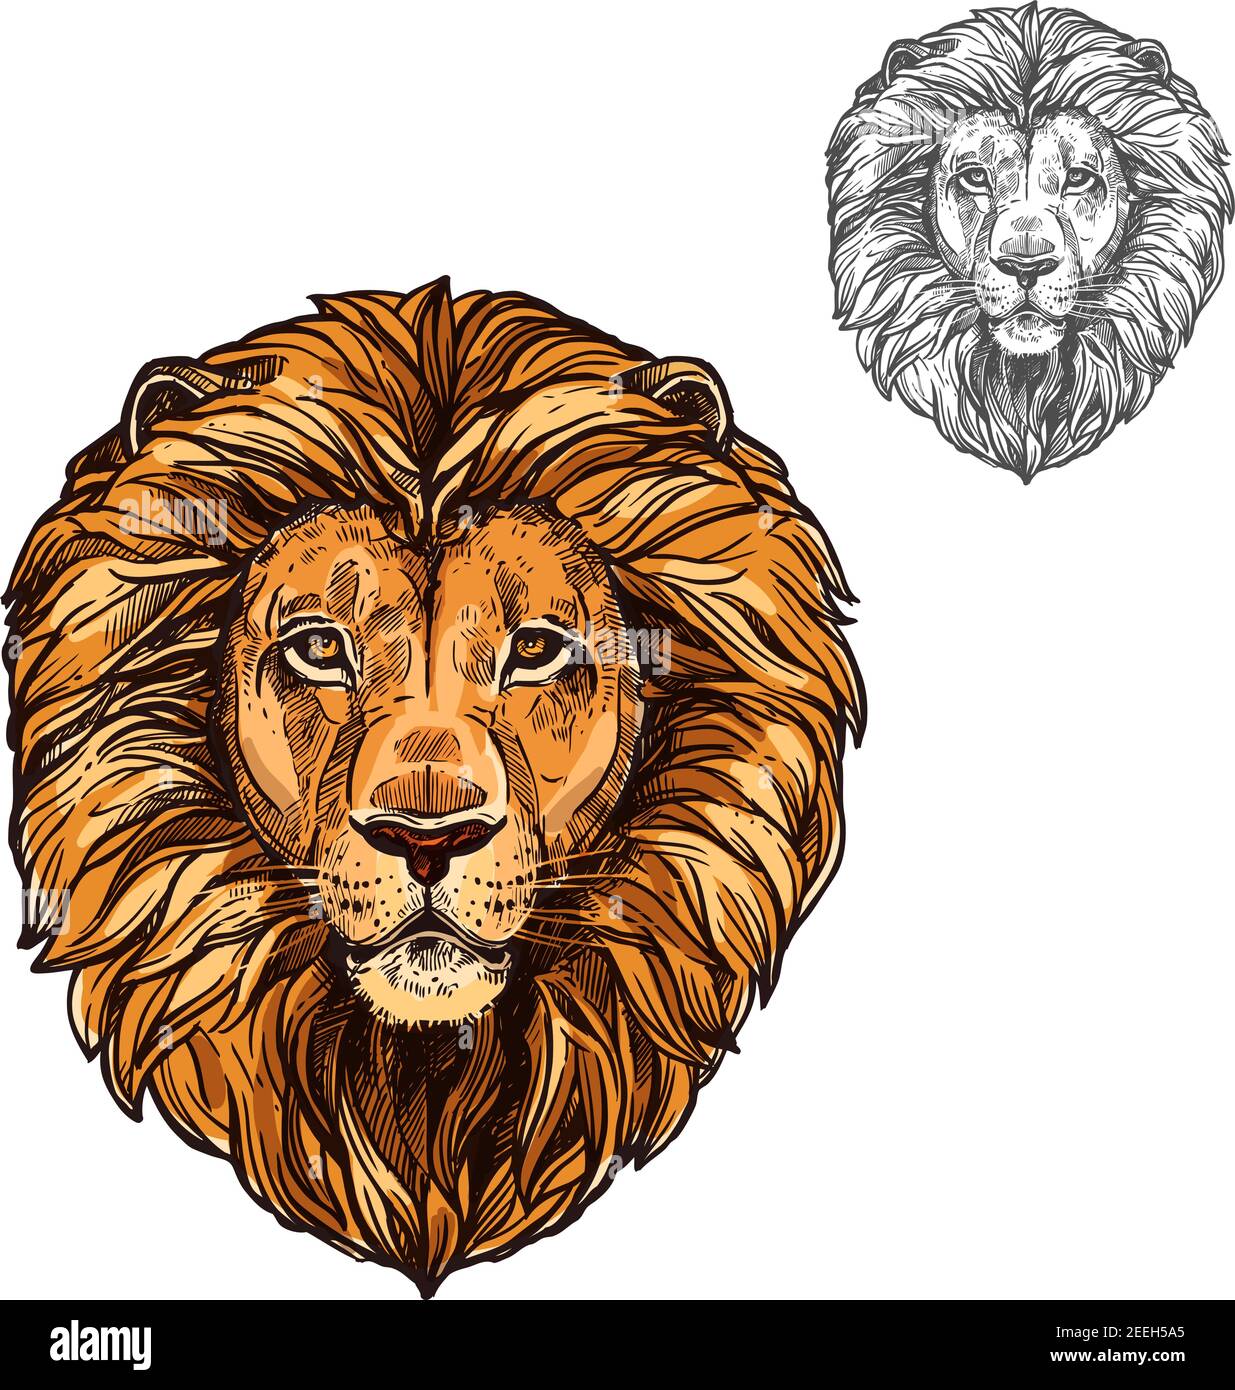 Lion African wild animal head or muzzle sketch. Vector isolated icon of panther leo species cat for zoology, mascot blazon of sport team, wildlife sav Stock Vector